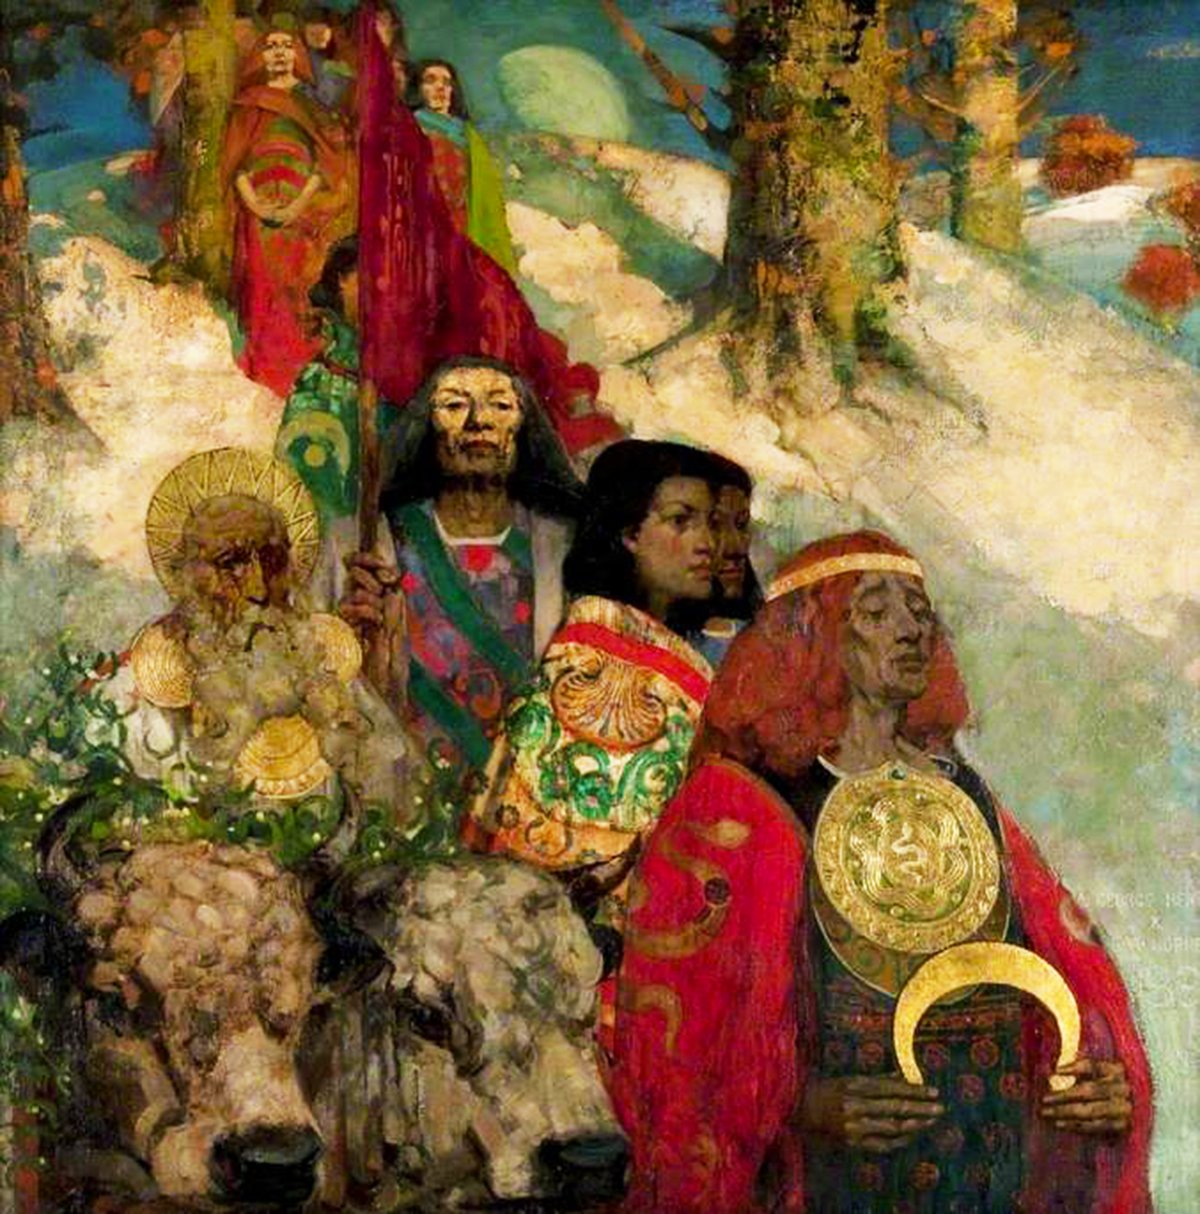 Ceremonial procession of Druids in ornate robes carrying the sacred mistletoe, cut with a golden sickle, down a hillside, reflecting Celtic reverence for the plant's magical and medicinal properties.